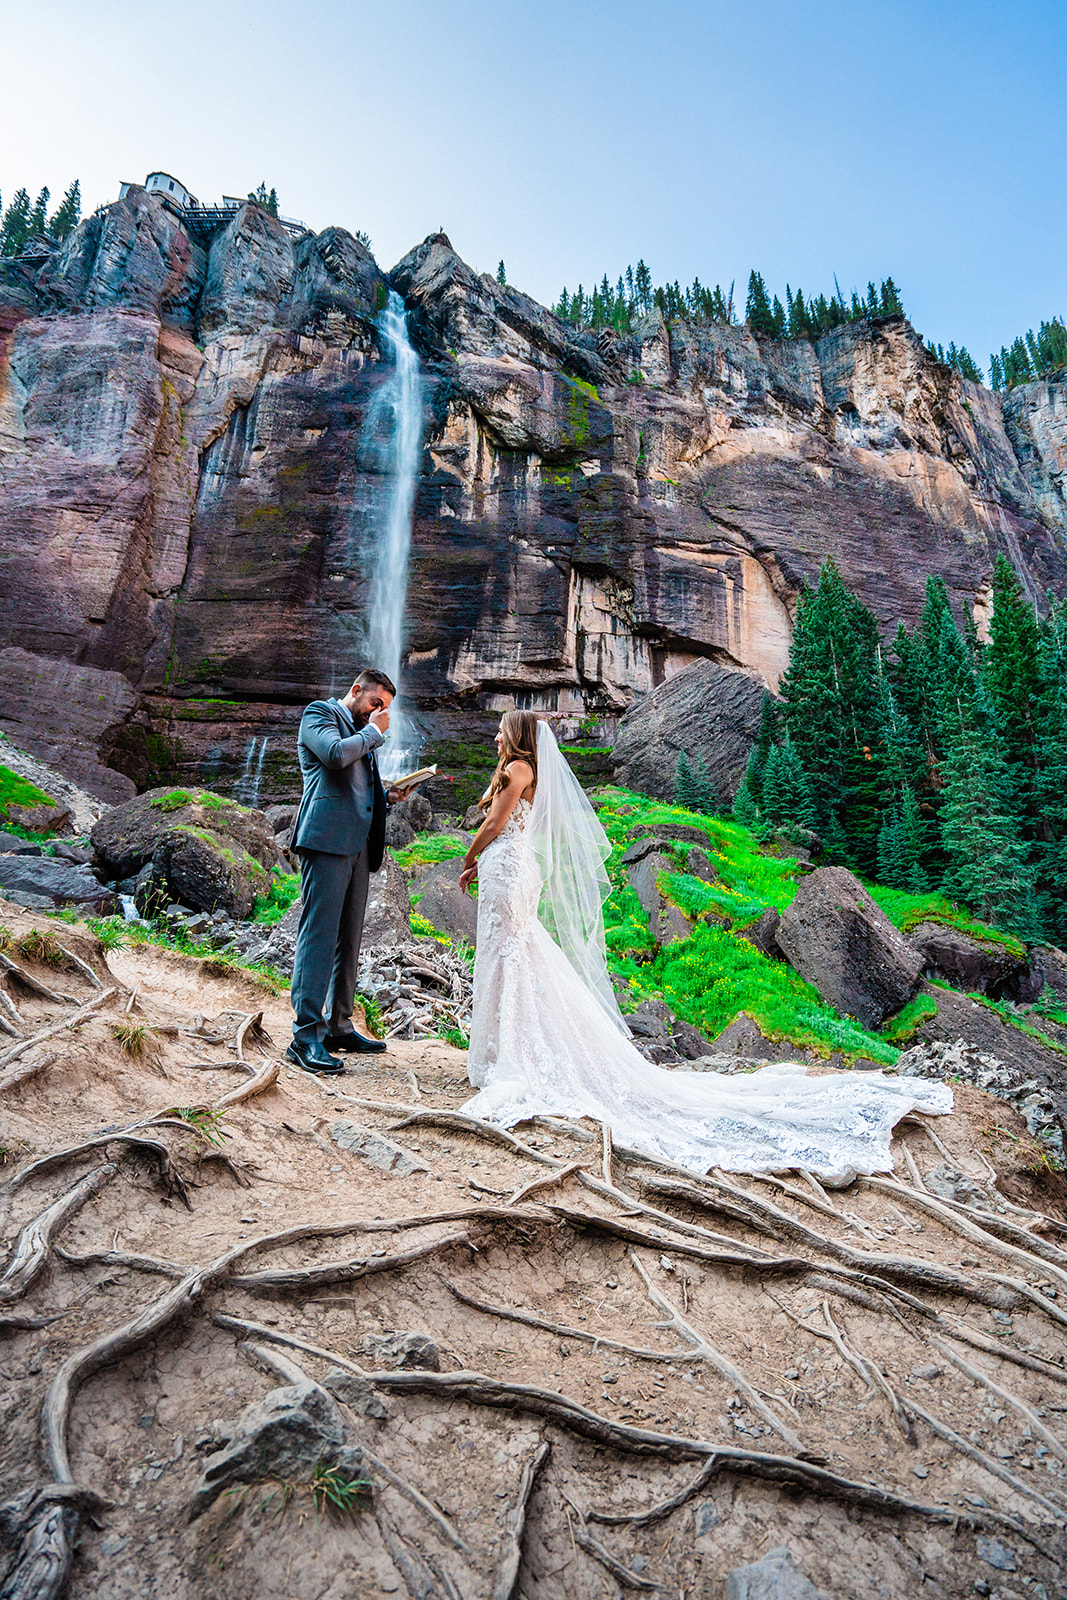 Bride and groom exchanging vows in front of Bridal Veil Falls